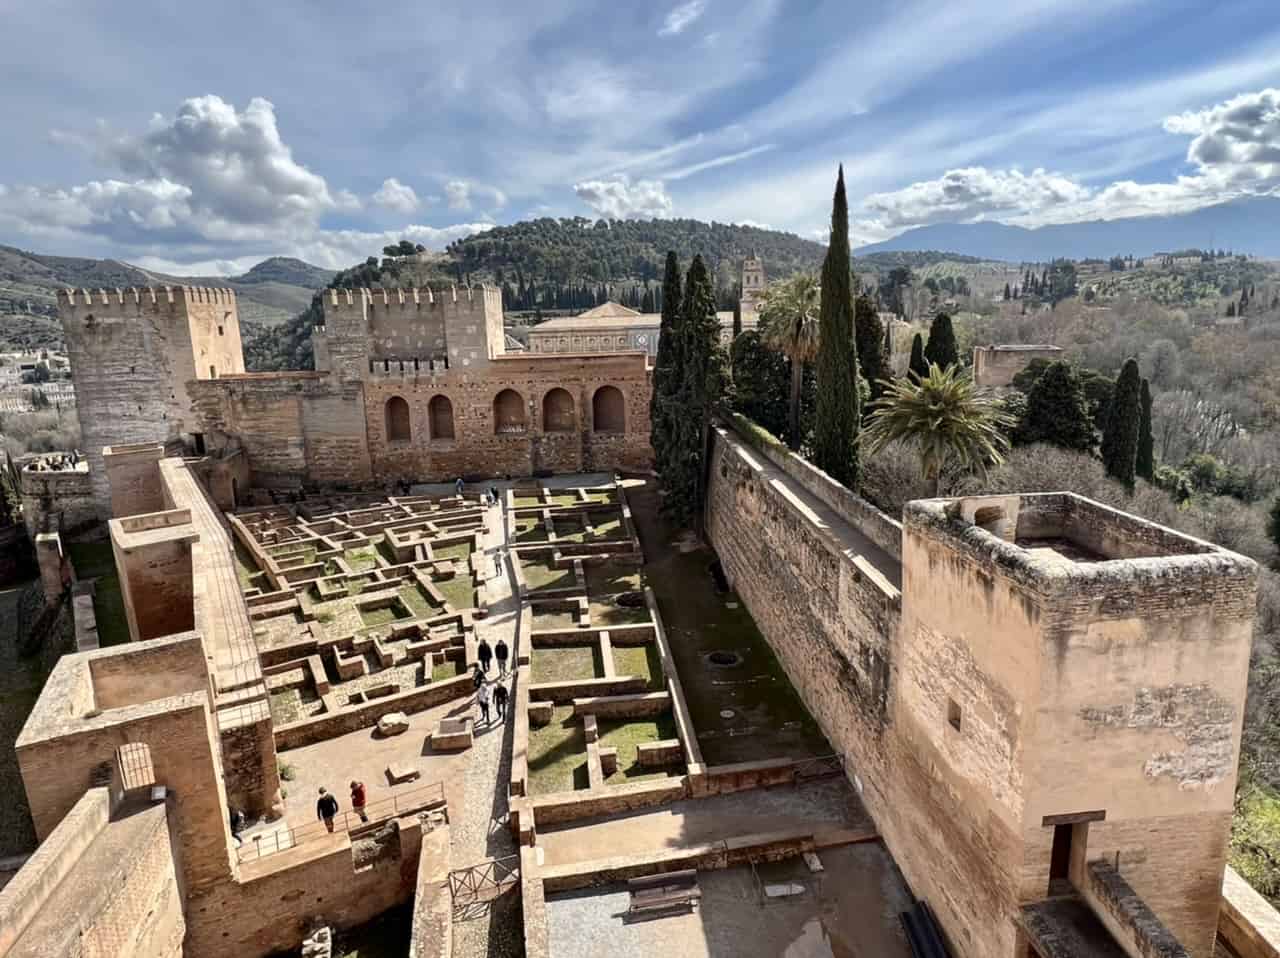 The Alcazaba Fortress at the furthest edge of the Alhambra complex